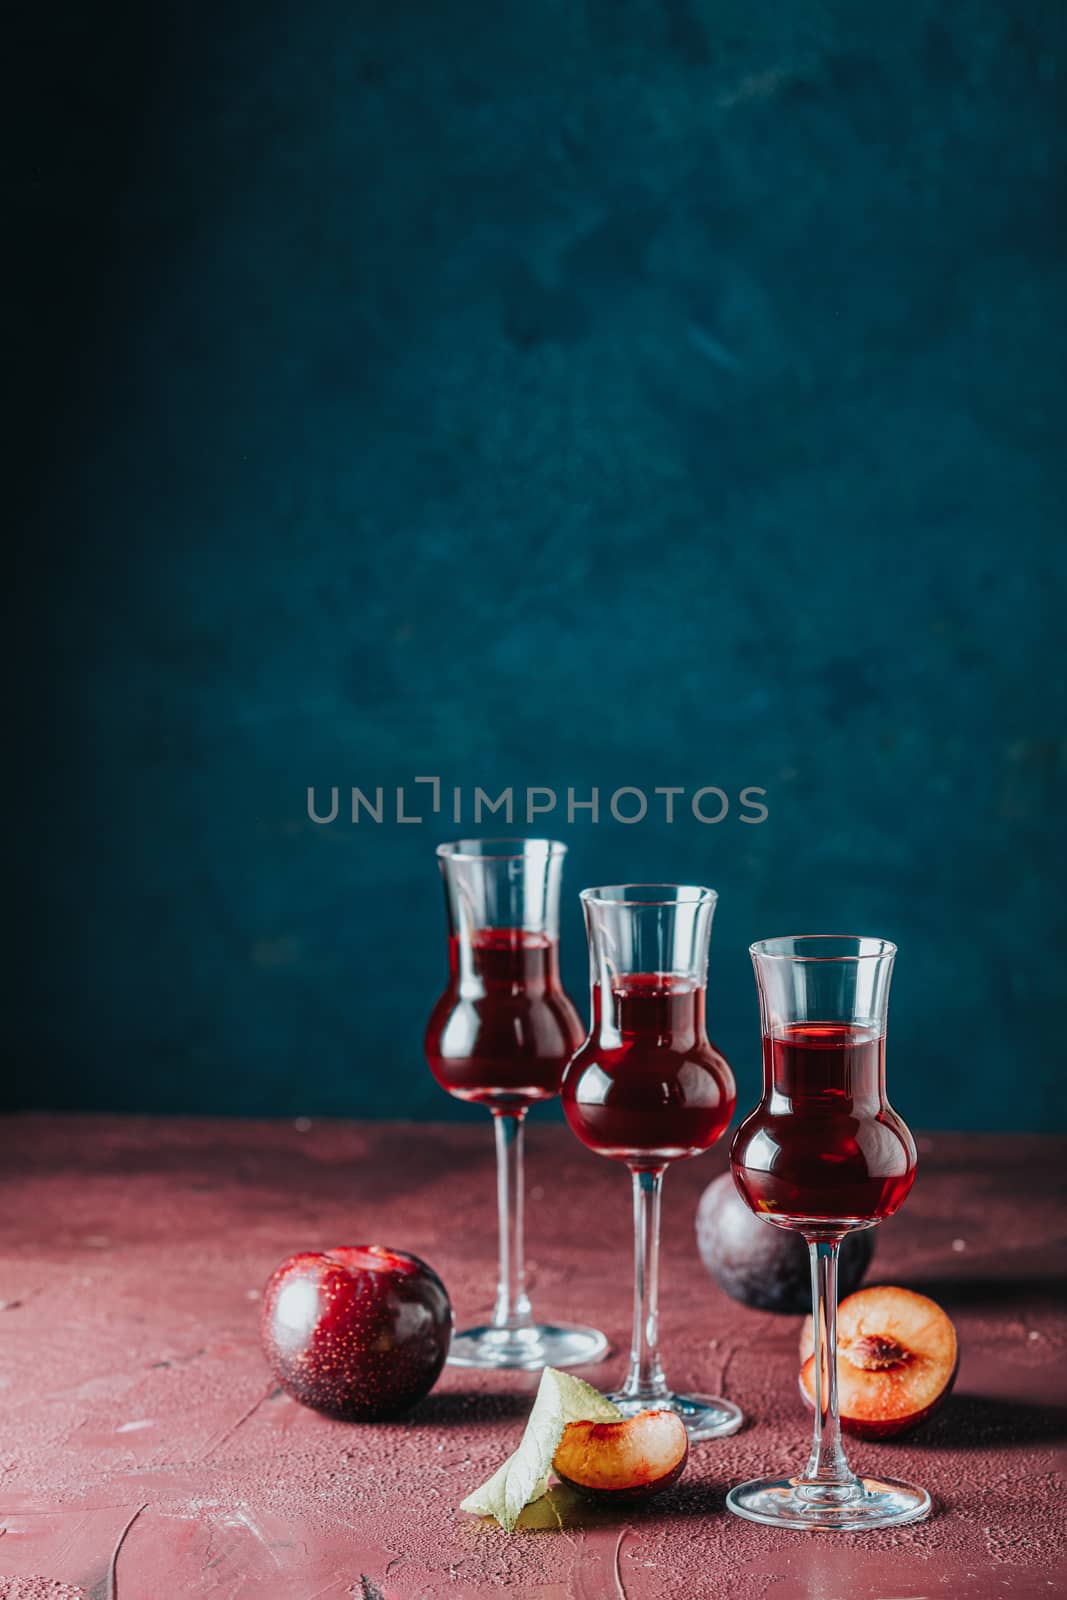 Plums strong alcoholic drink in grappas wineglass with dew. Hard liquor, slivovica, plum brandy or plum vodka with ripe plums on dark blue and claret bordeaux concrete surface